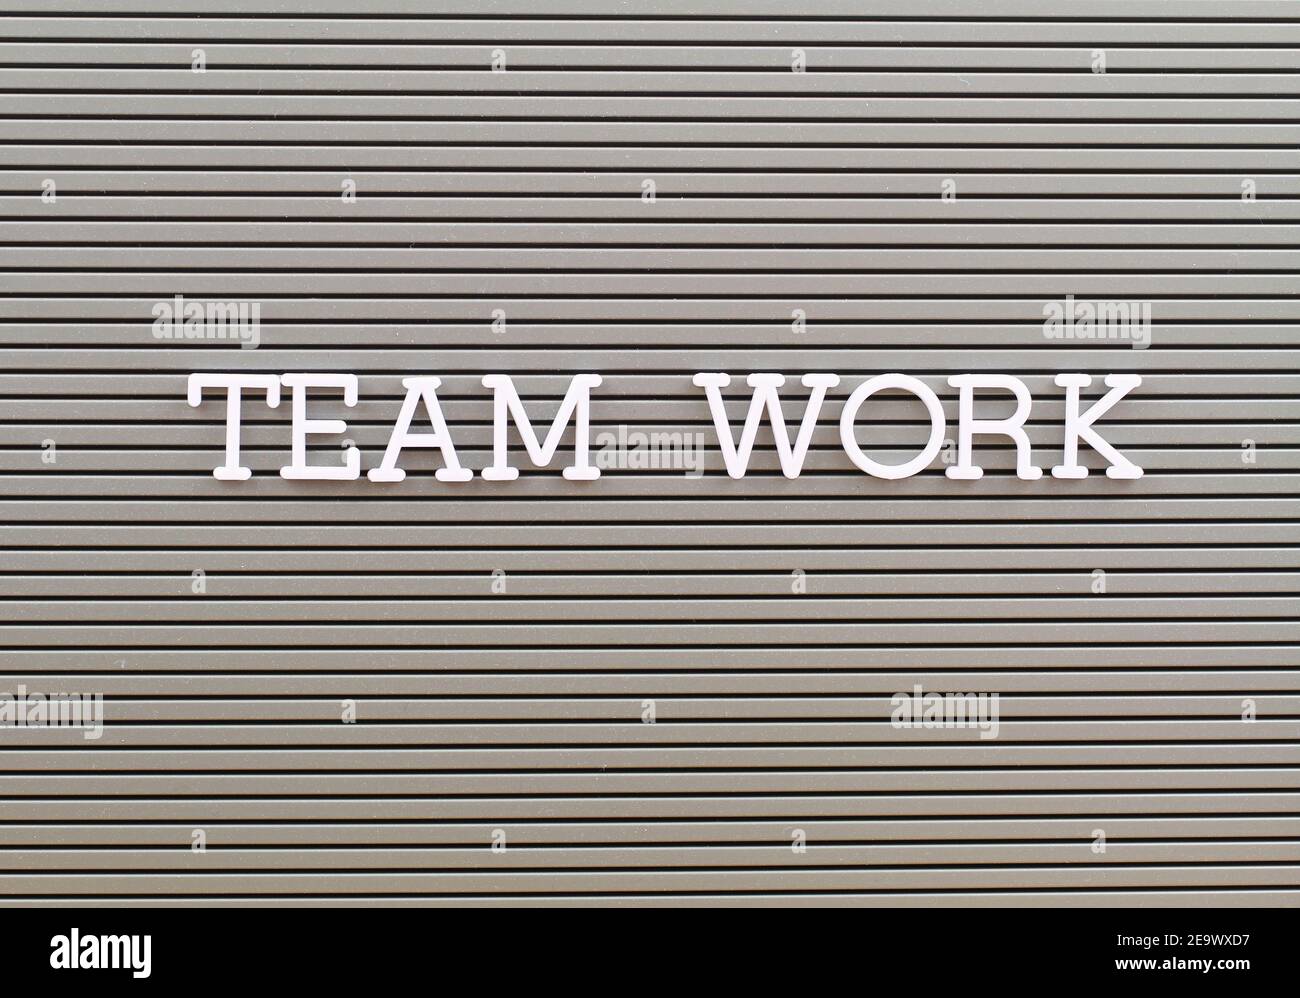 Team work written with white plastic letters on grey board Stock Photo